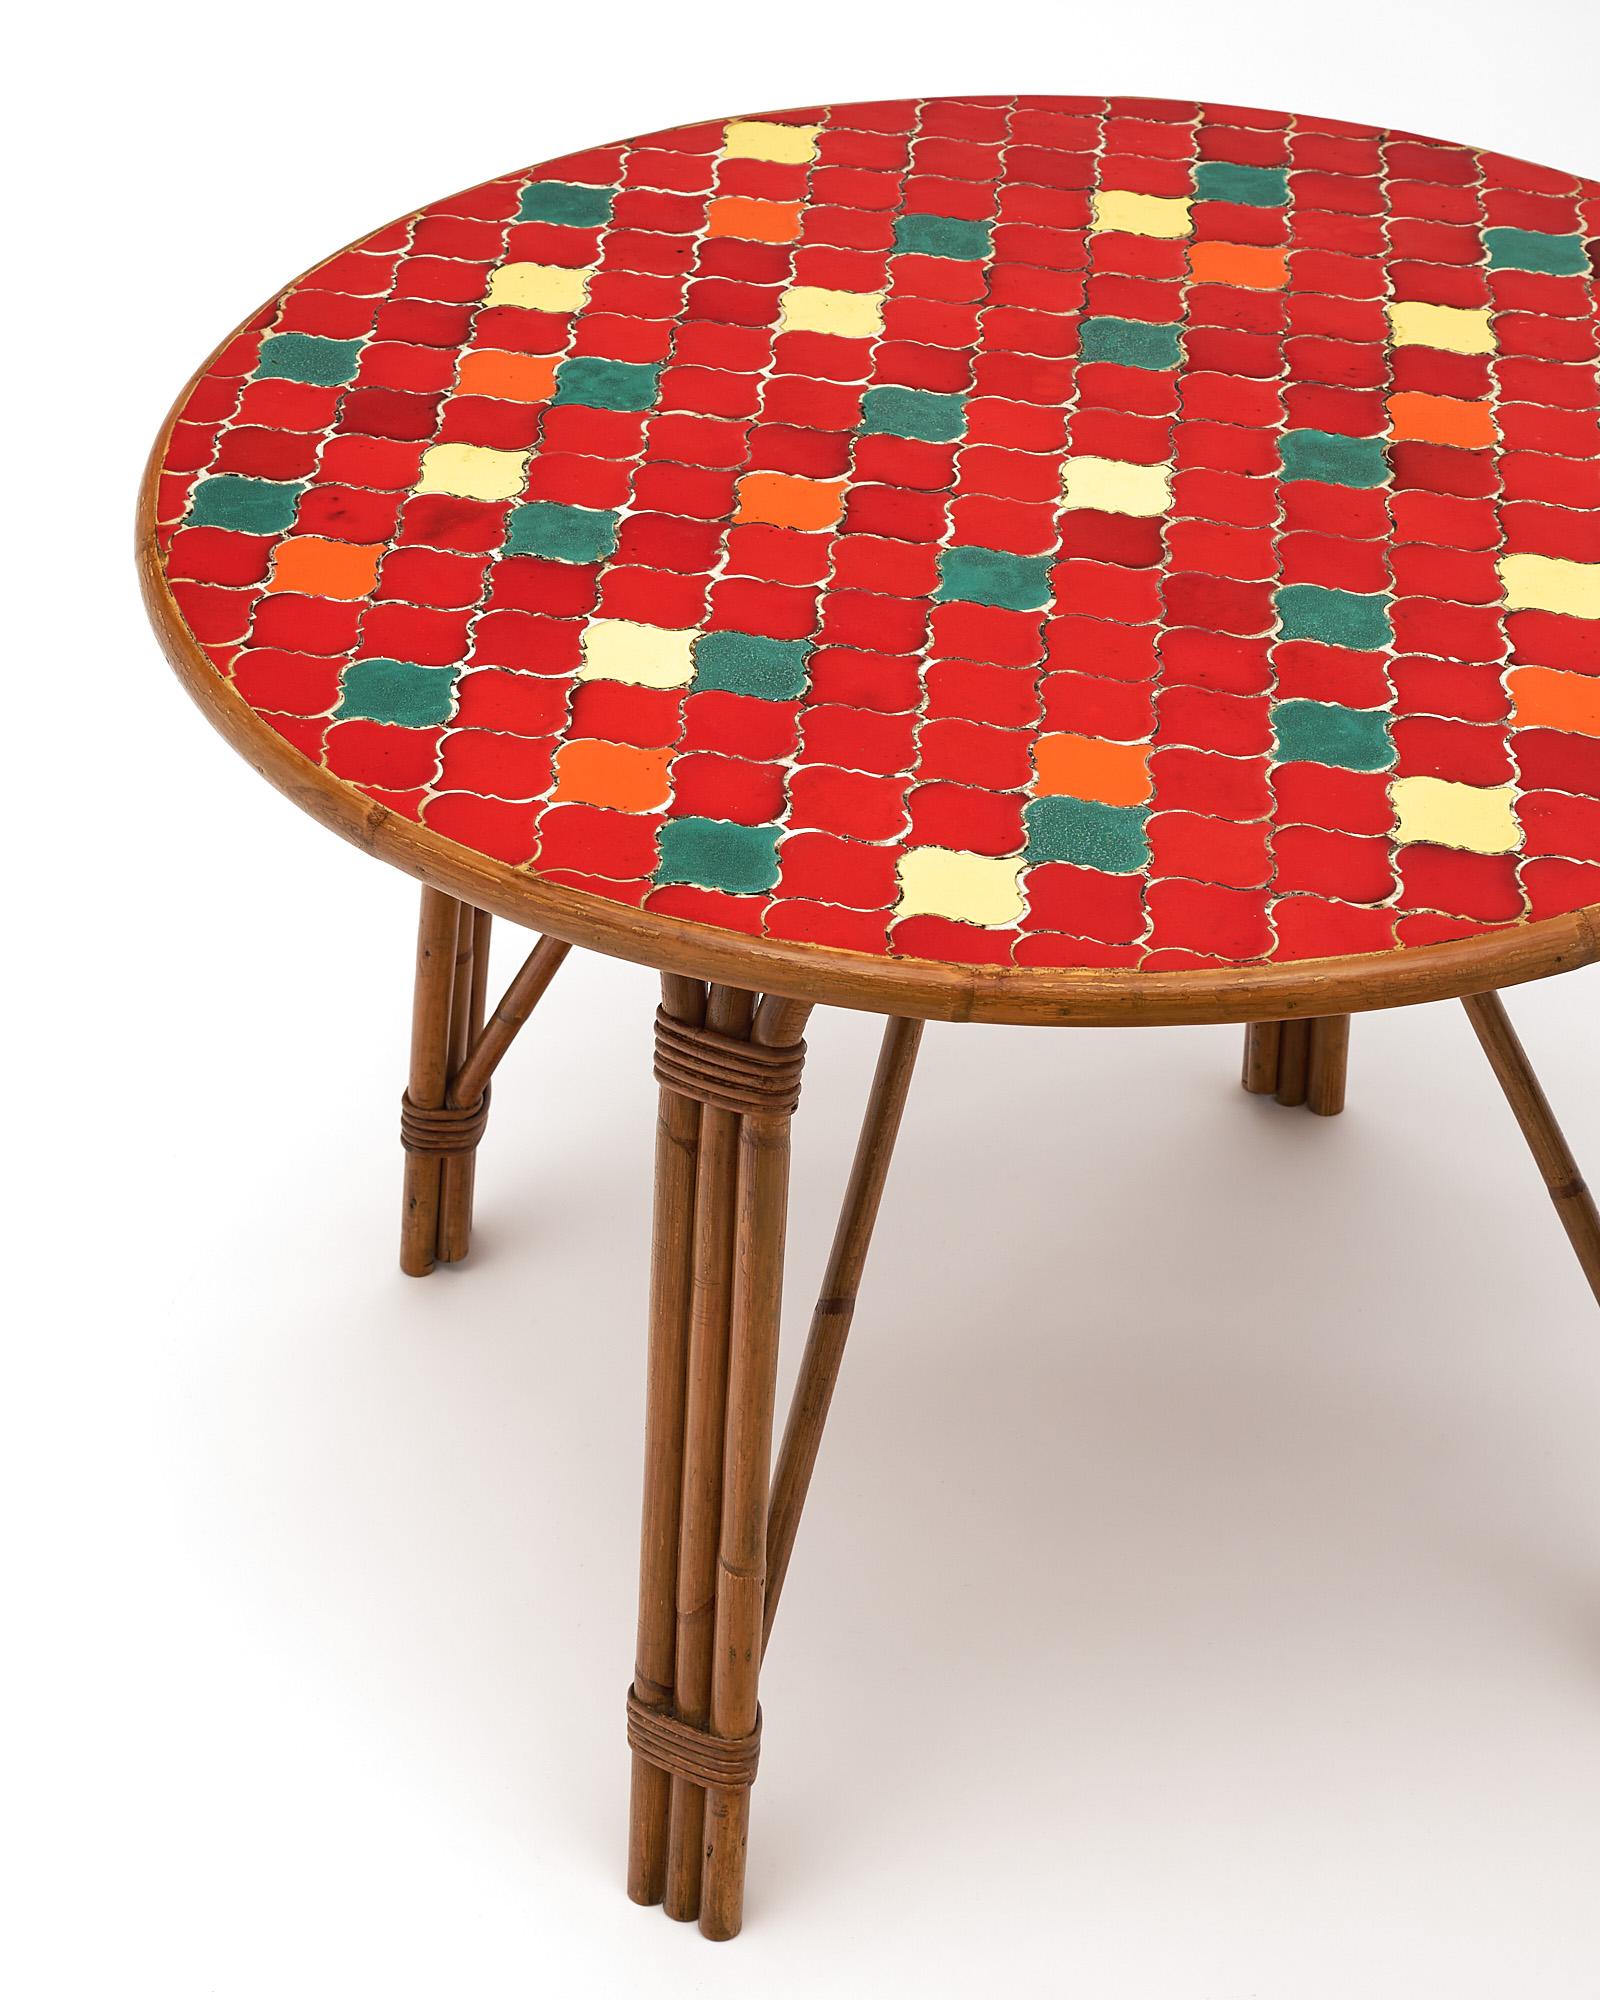 French table with bamboo legs supporting a tiled top in the manner of Audoux Minet. This piece features brightly colored red, yellow, orange, and green ceramic tiles. We love the unique style and energy it brings to a space!